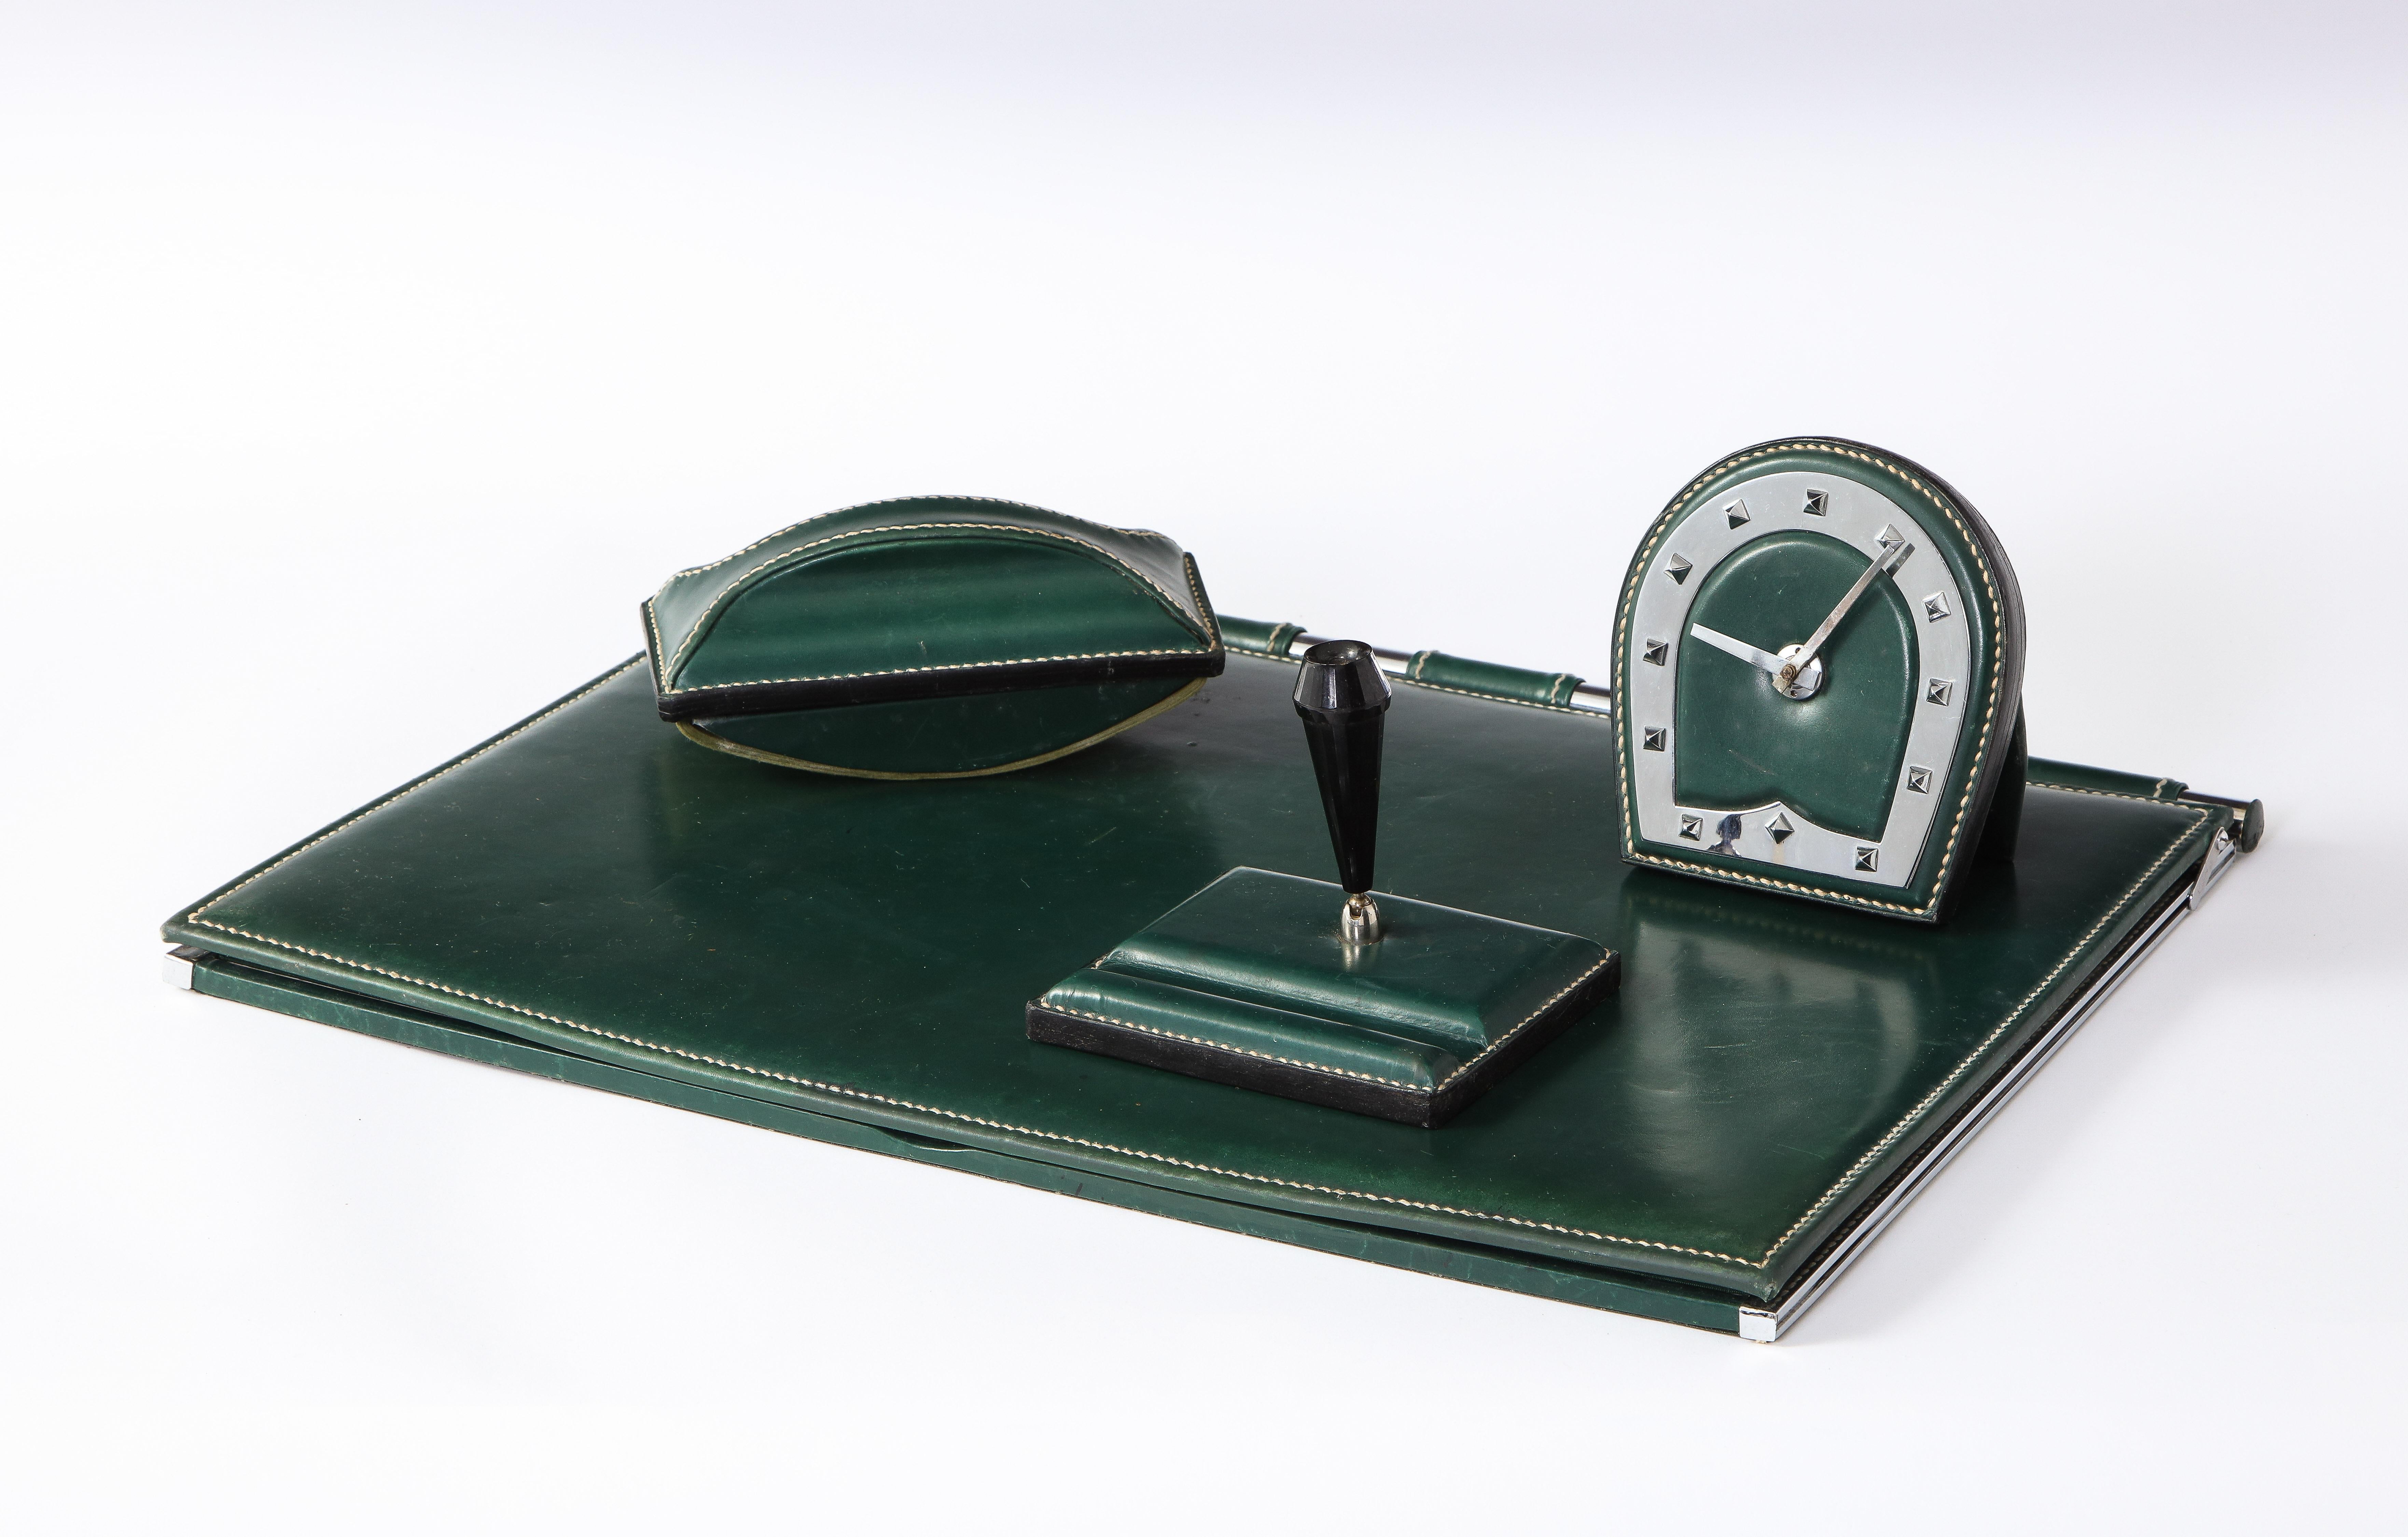 Desk set by Jacques Adnet comprises a desk mat a pen holder, ink blotter and a clock. All with signature Adnet saddle-stitch detail. In excellent vintage shape. Enquire about individual items sizes.